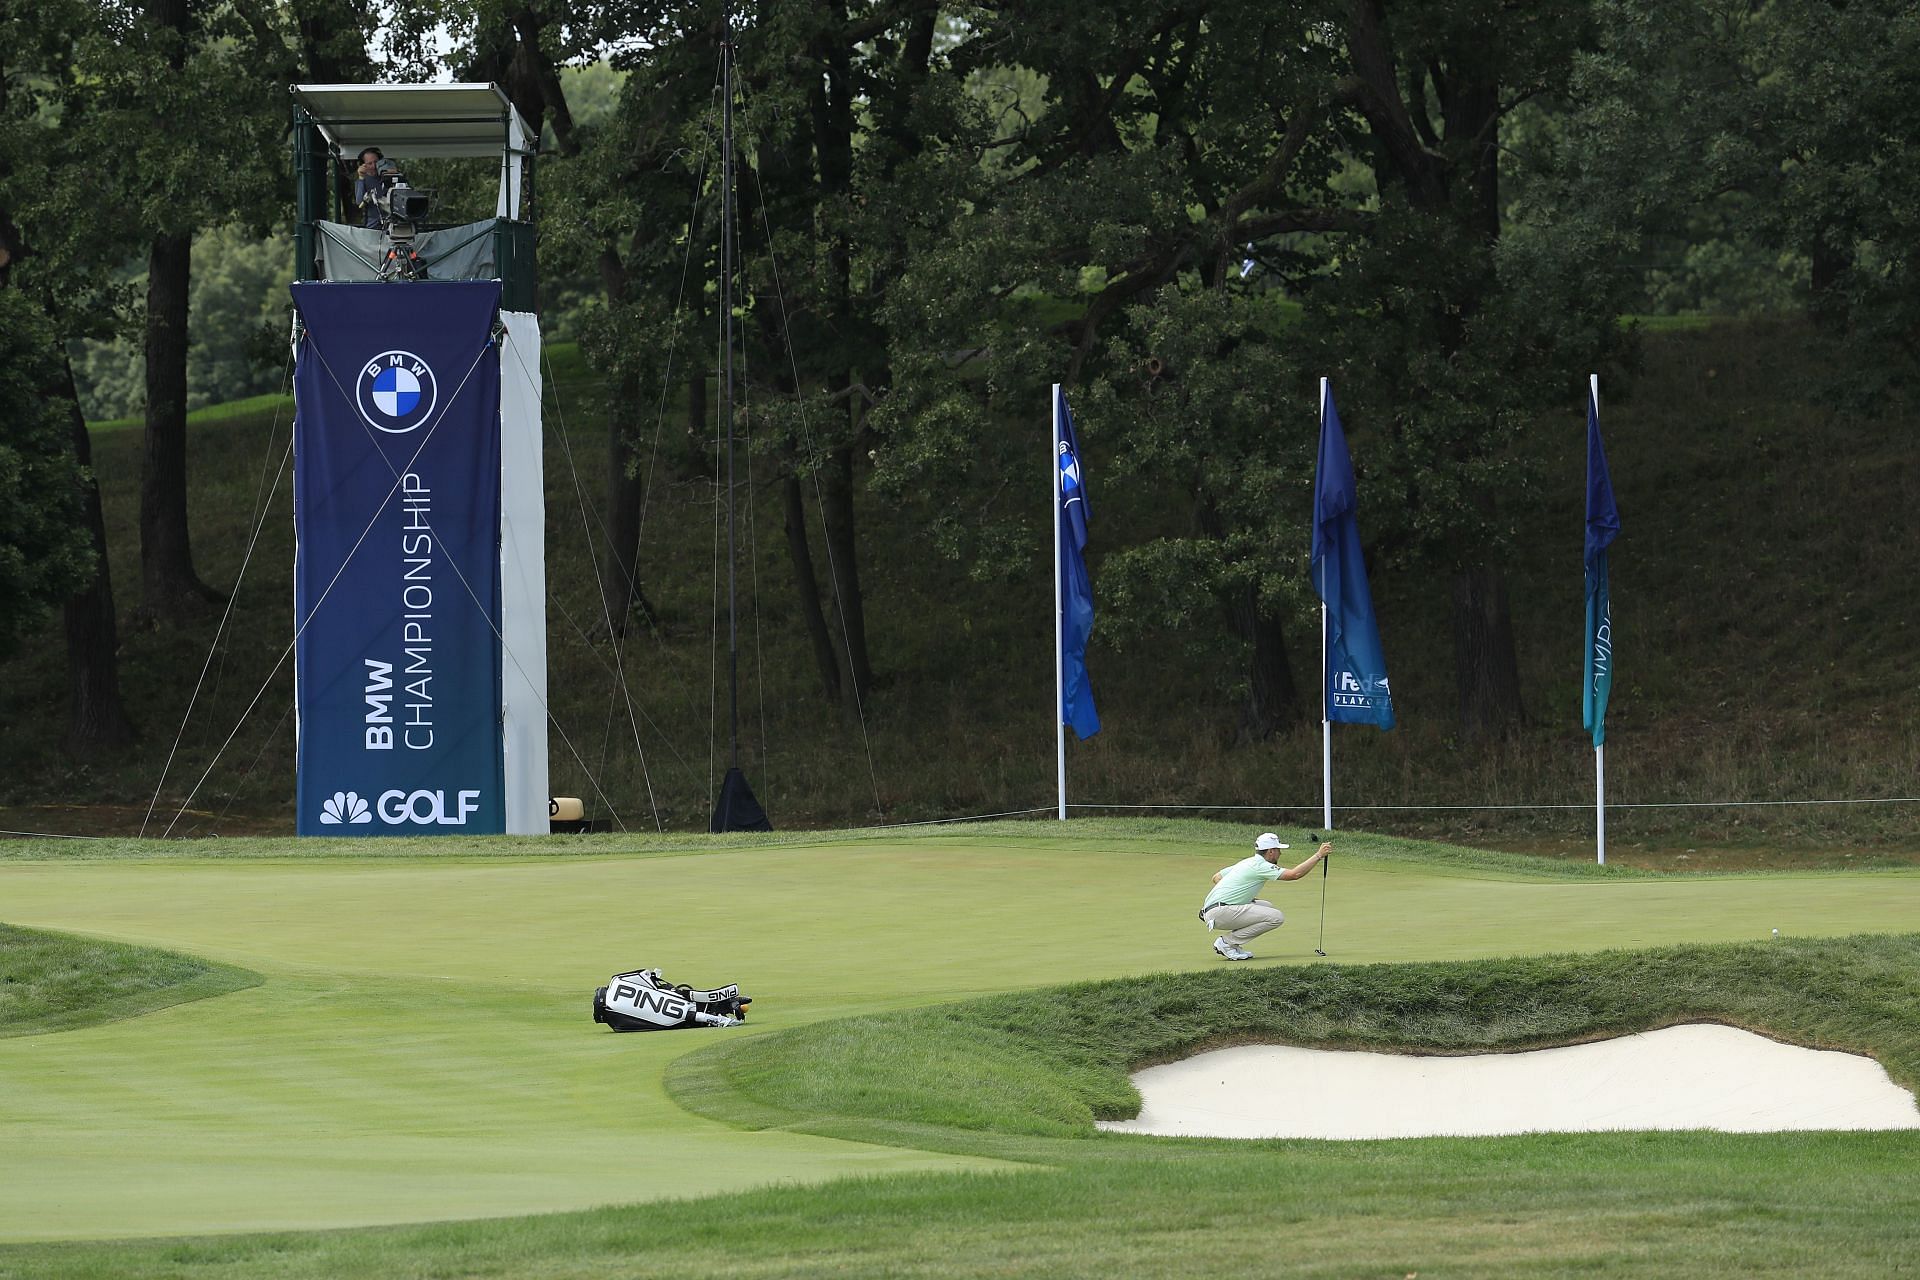 2023 BMW Championship location Where is the event being held?